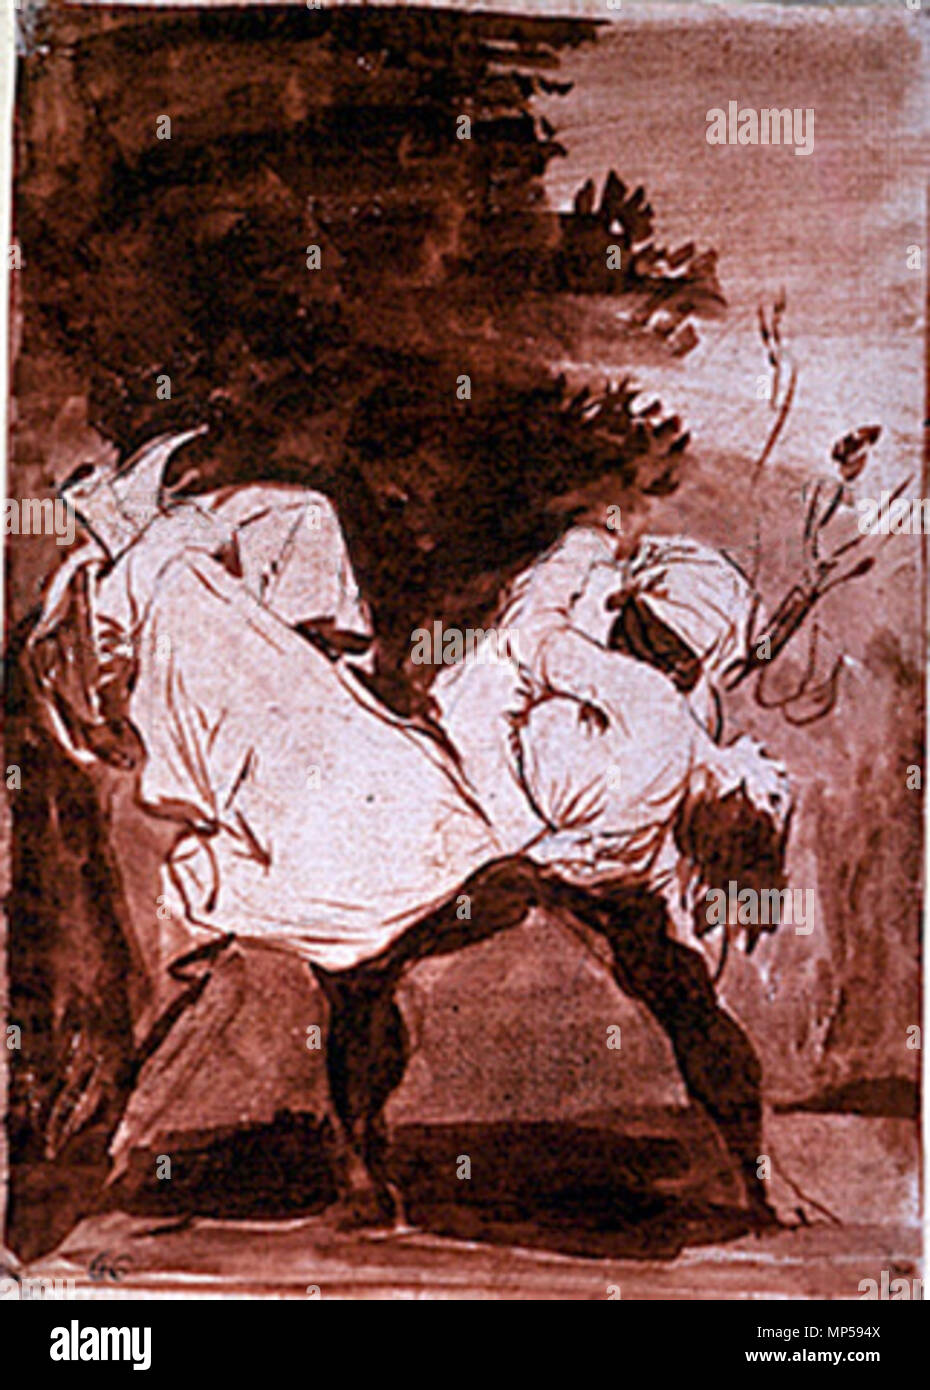 . So they carried her off! . circa 1800.    Francisco Goya  (1746–1828)      Alternative names Francisco Goya Lucientes, Francisco de Goya y Lucientes, Francisco José Goya Lucientes  Description Spanish painter, printmaker, lithographer, engraver and etcher  Date of birth/death 30 March 1746 16 April 1828  Location of birth/death Fuendetodos Bordeaux  Work location Madrid, Zaragoza, Bordeaux  Authority control  : Q5432 VIAF: 54343141 ISNI: 0000 0001 2280 1608 ULAN: 500118936 LCCN: n79003363 NLA: 36545788 WorldCat 1129 So they carried her off! Caprichos print Stock Photo